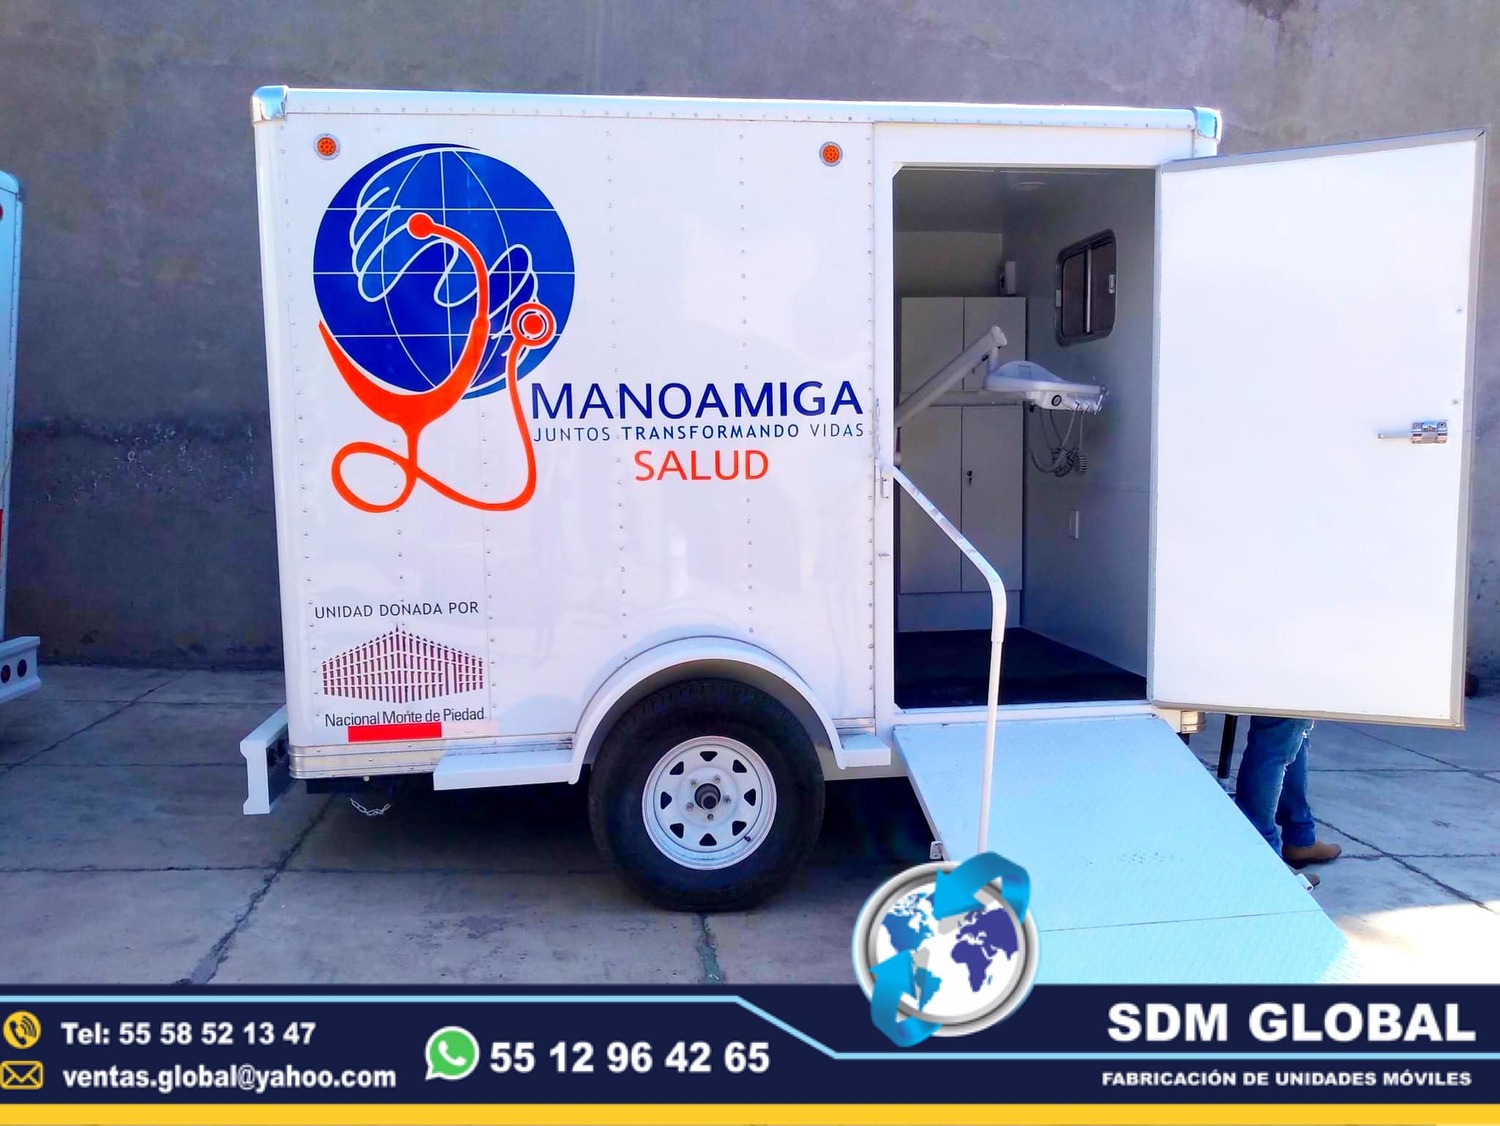 <span style="font-weight: bold;">Fabrica de Remolques Medico Dental Movil Sdm Global</span><br>